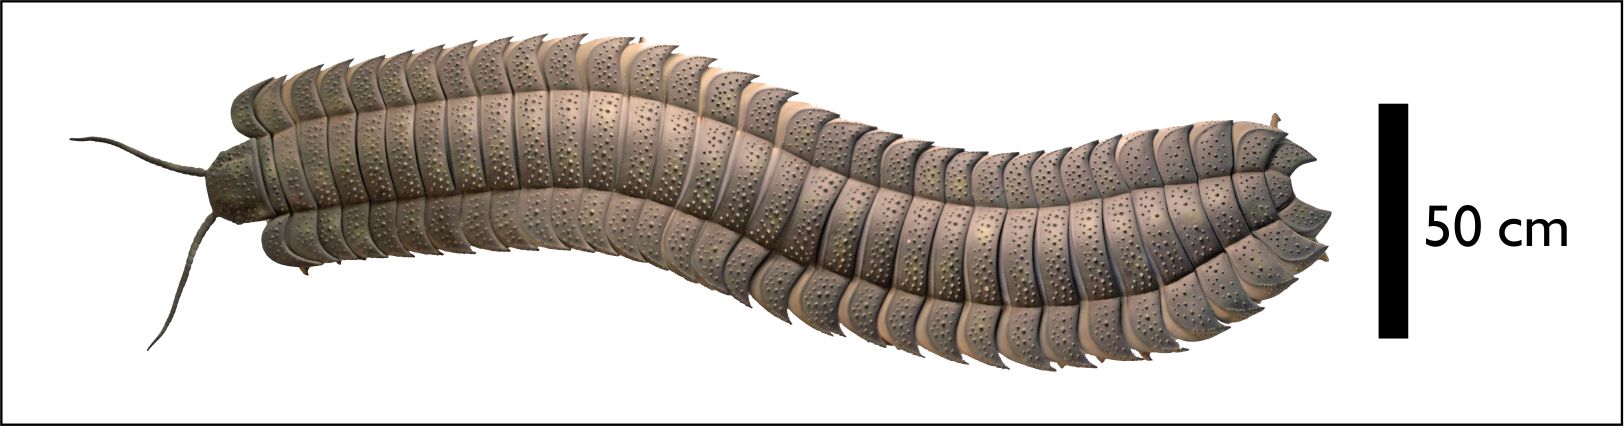 An artist's impression of a giant millipede fossil found in the UK